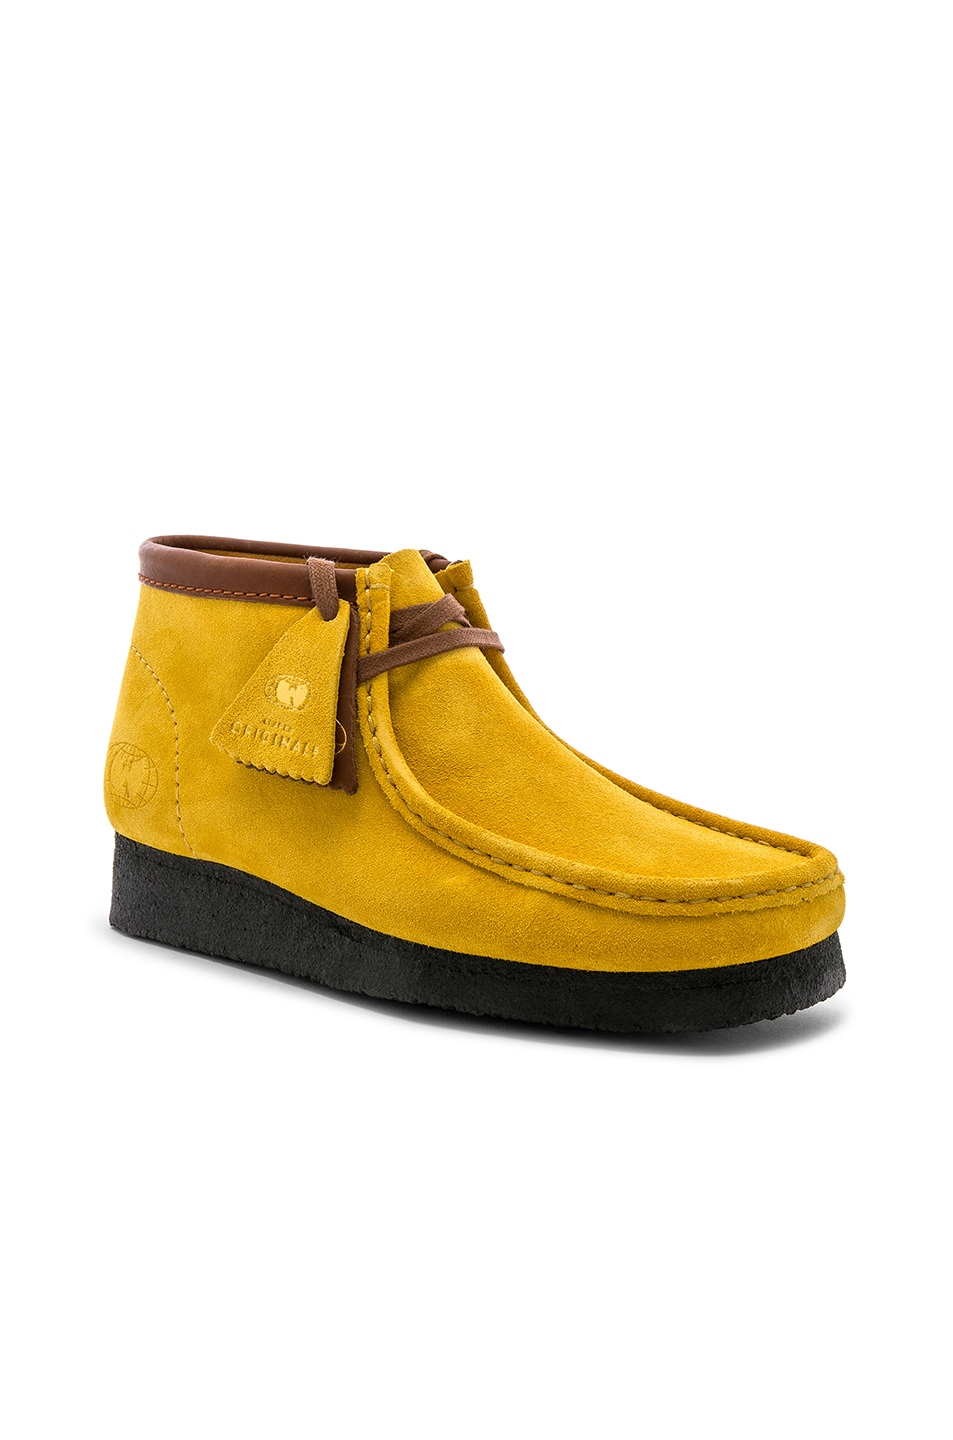 Image 1 of Clarks x Wu Tang 36th Chamber in Yellow & Cola